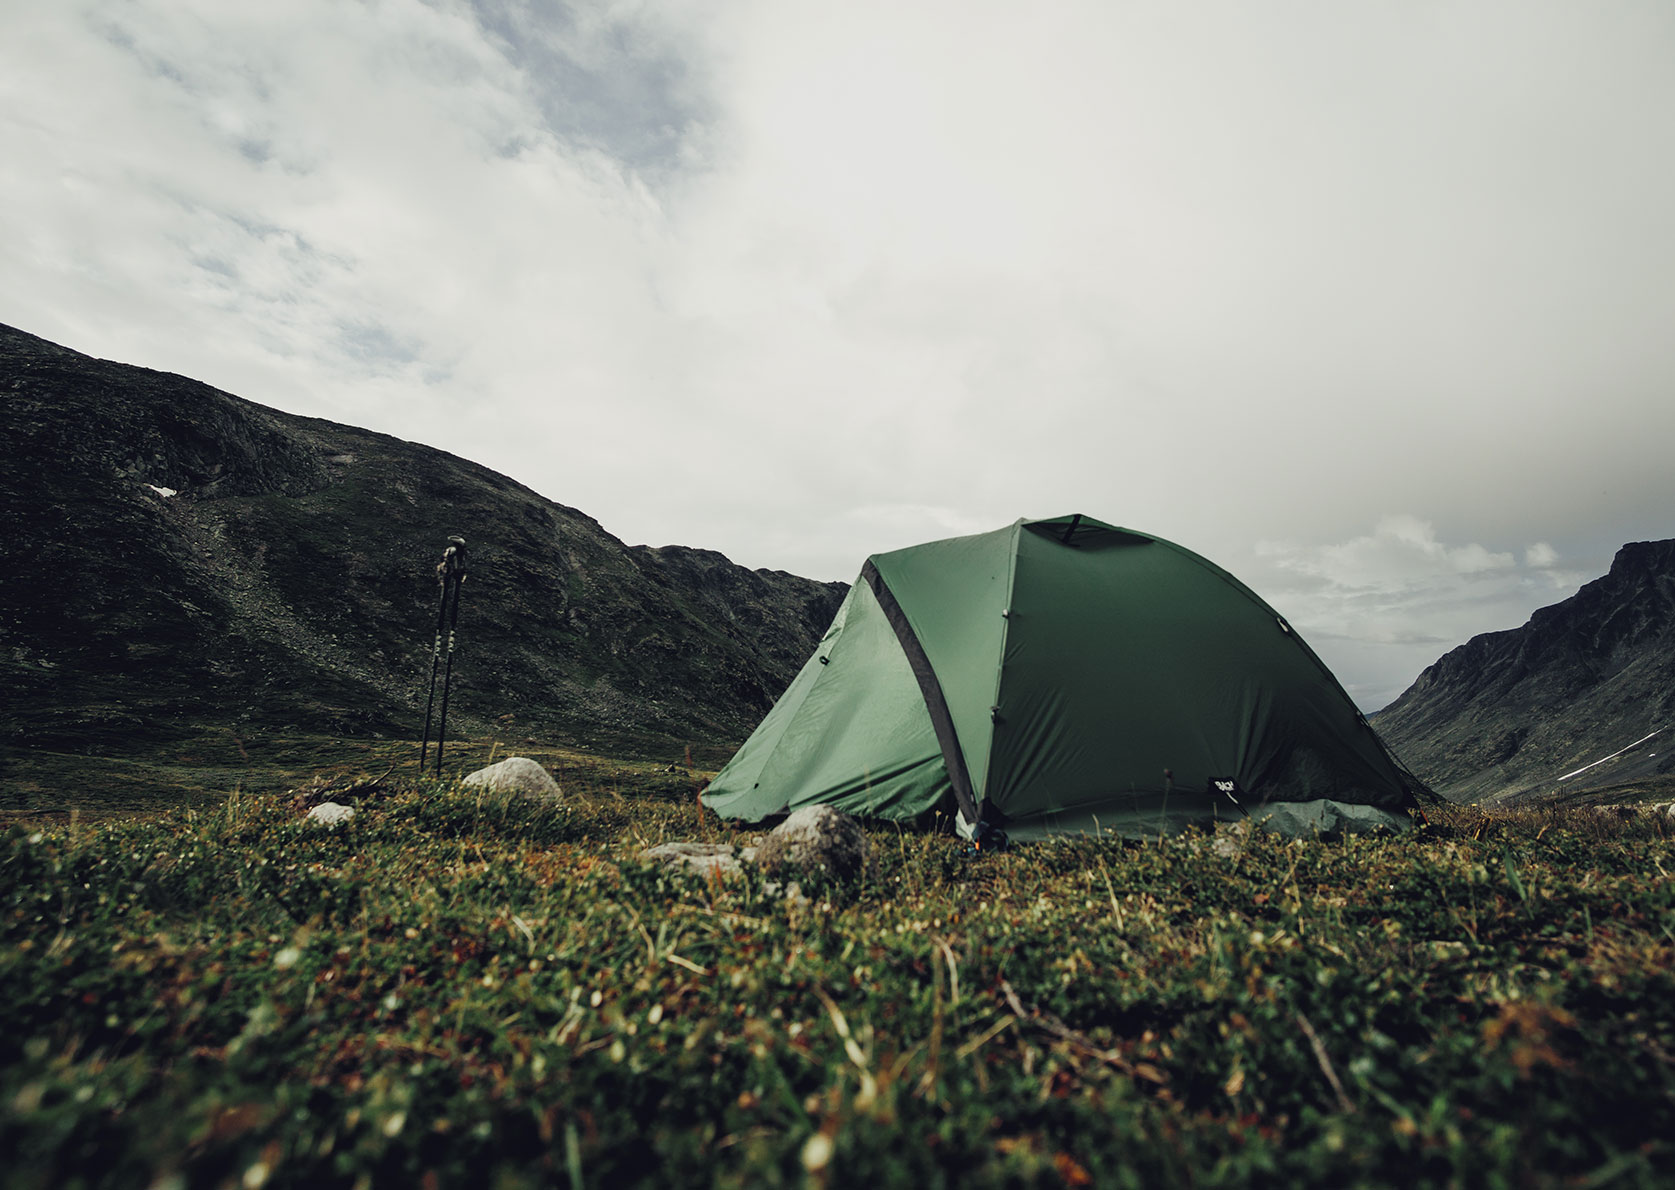 A lonely tent pitched in isolation in the mountains of the Jotunheimen national park